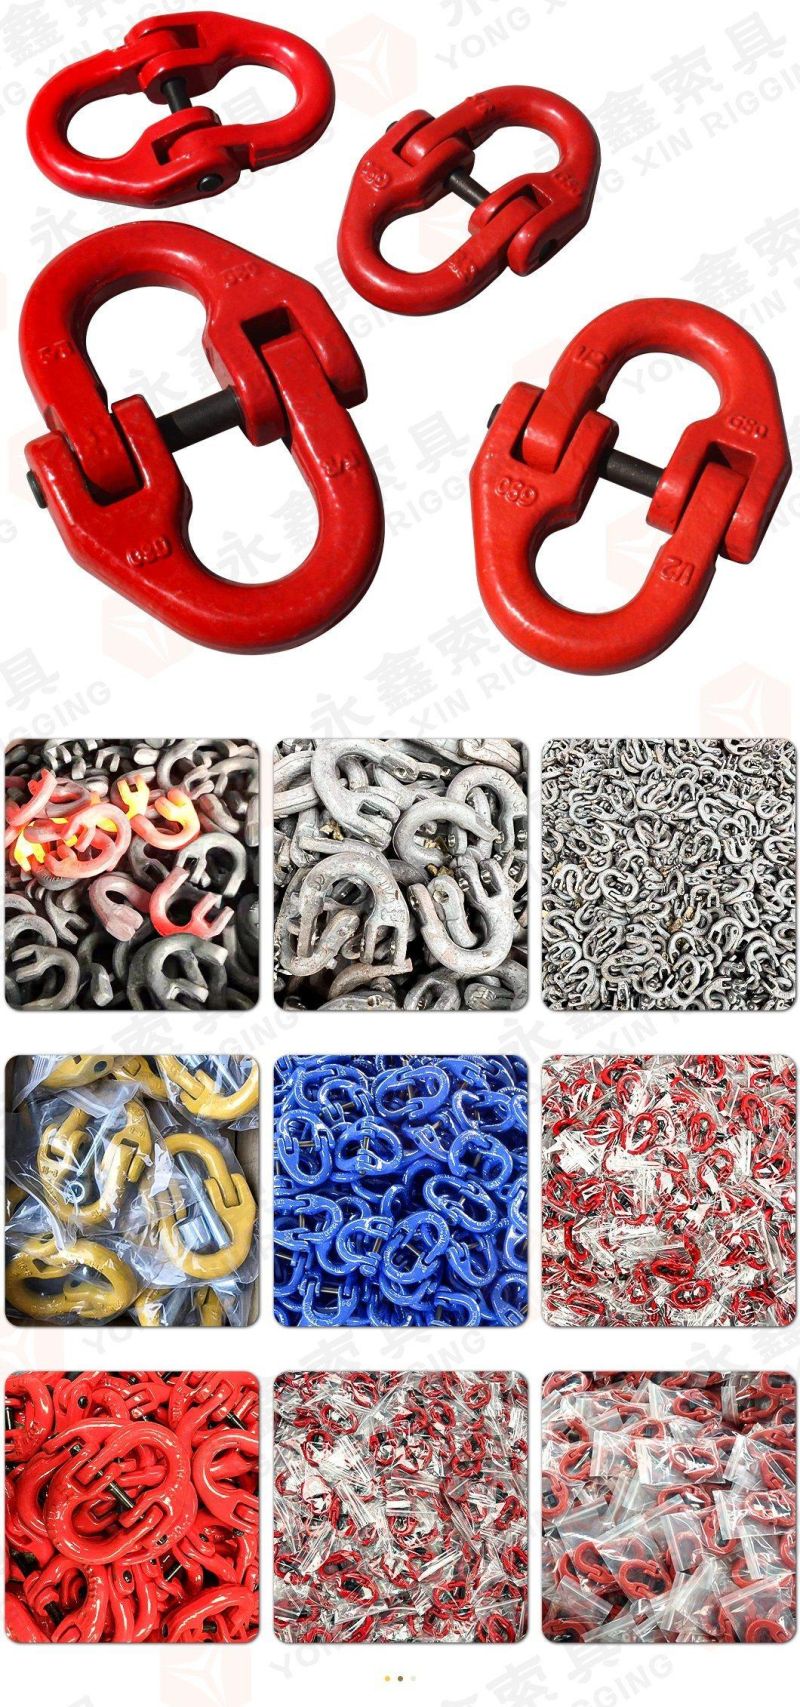 Rigging Hardware Sling Part Connecting Link Forged Lifting Point Connecting Link|Sling Part Lashing Accessories Connecting Link|Heavy Duty Chain Link